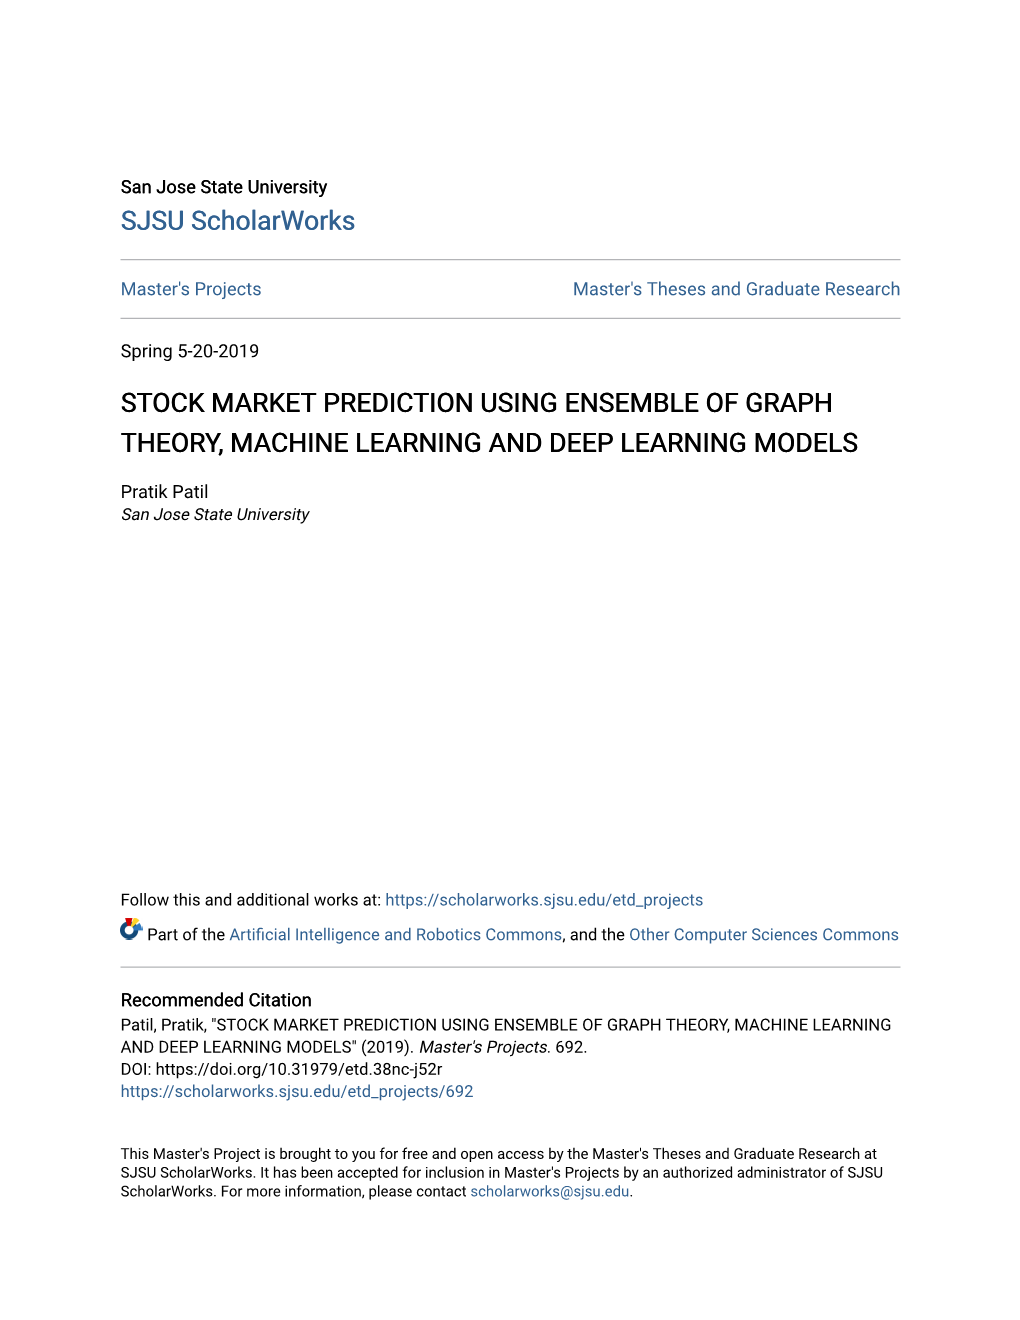 Stock Market Prediction Using Ensemble of Graph Theory, Machine Learning and Deep Learning Models